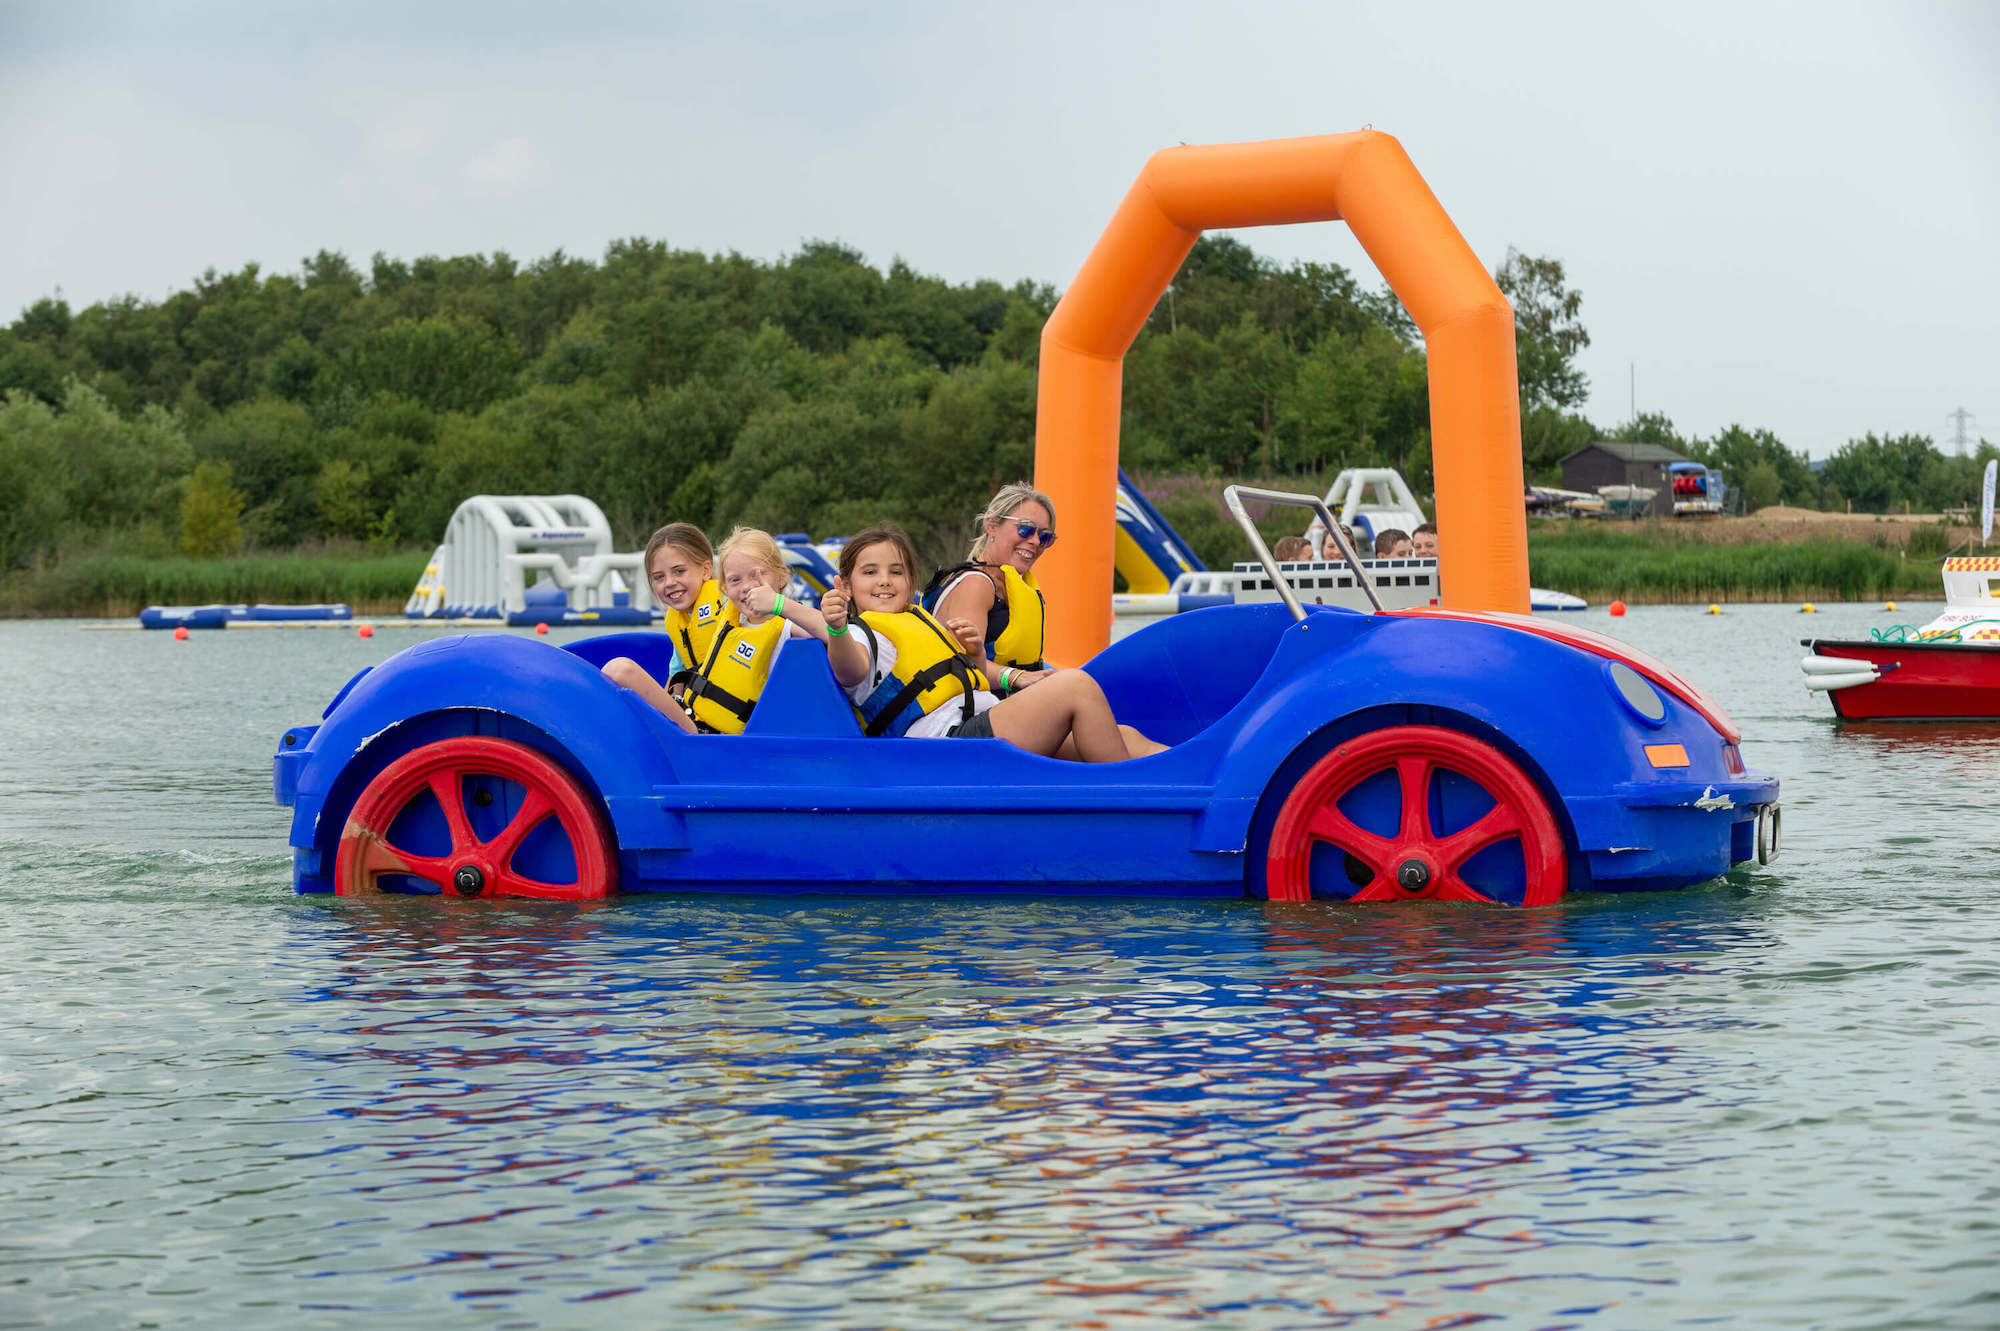 A large blue and red pedalo with a woman and three girls in it. One girl gives a thumbs up to the camera.